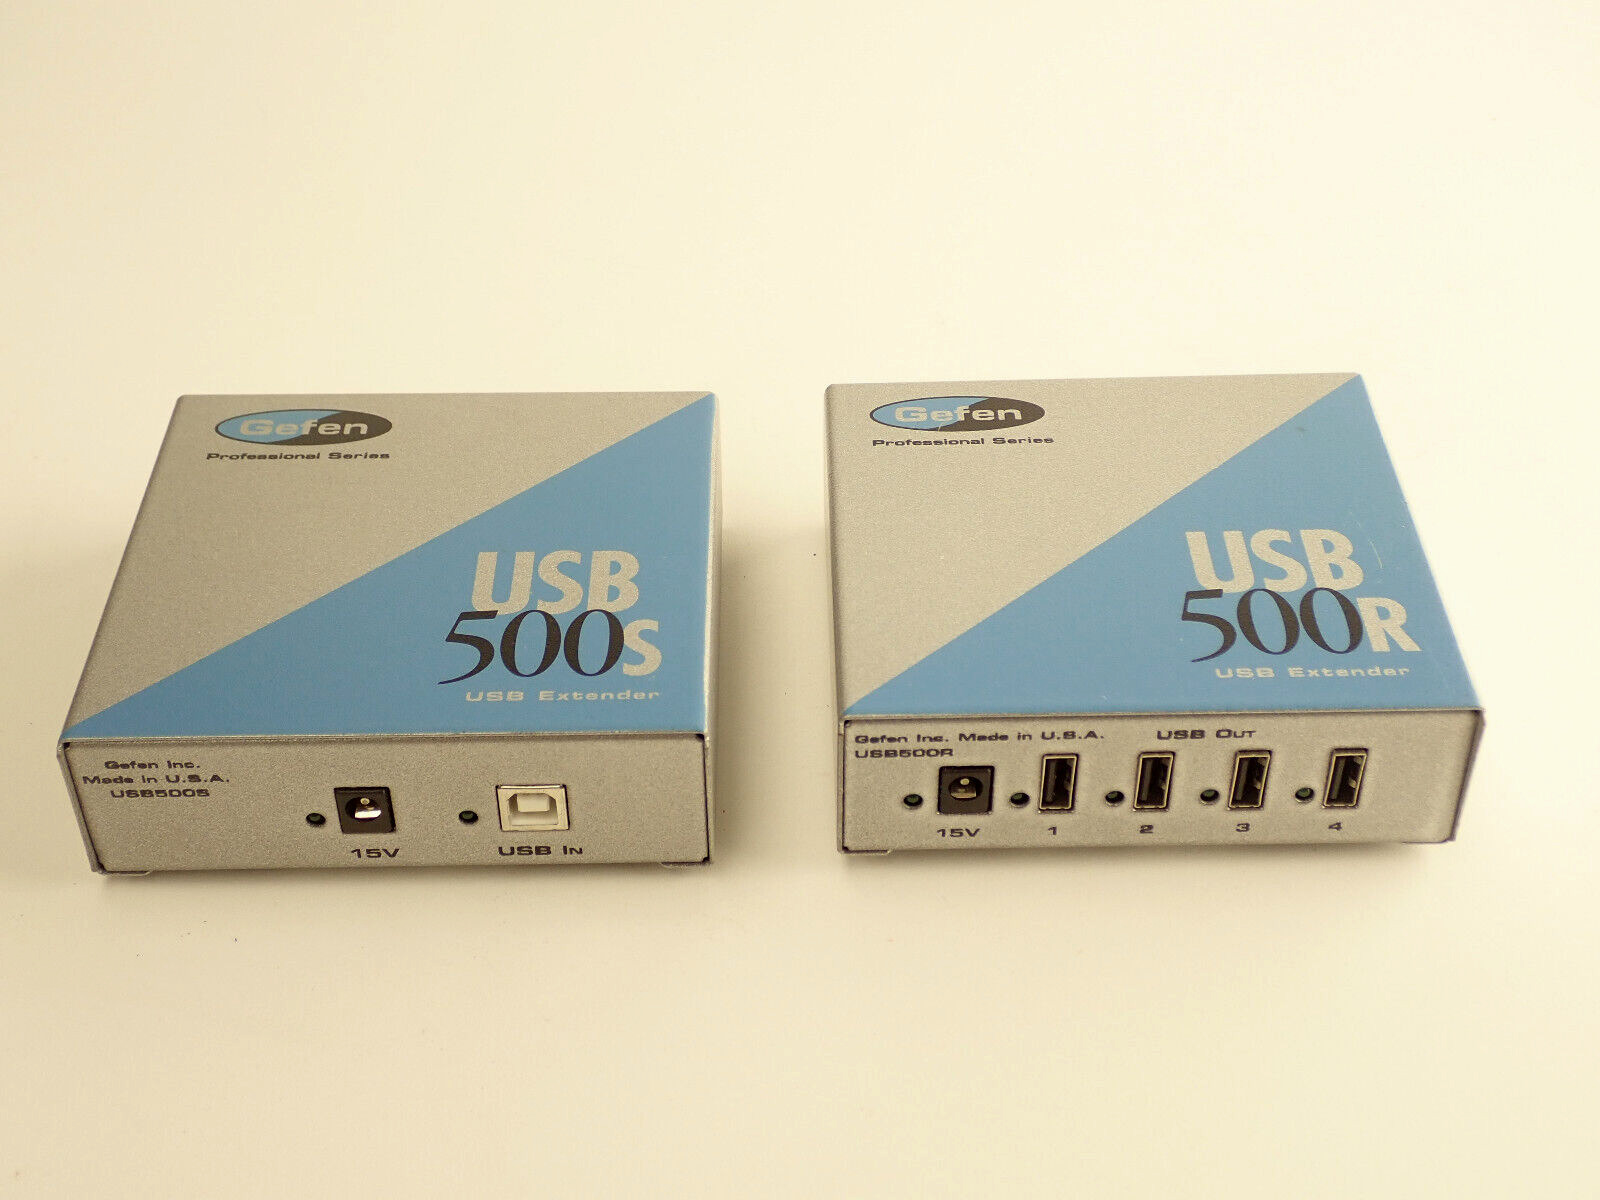 1 - Set of Gefen USB 500R & 500s 4-Port USB extender(NO power supplies included)